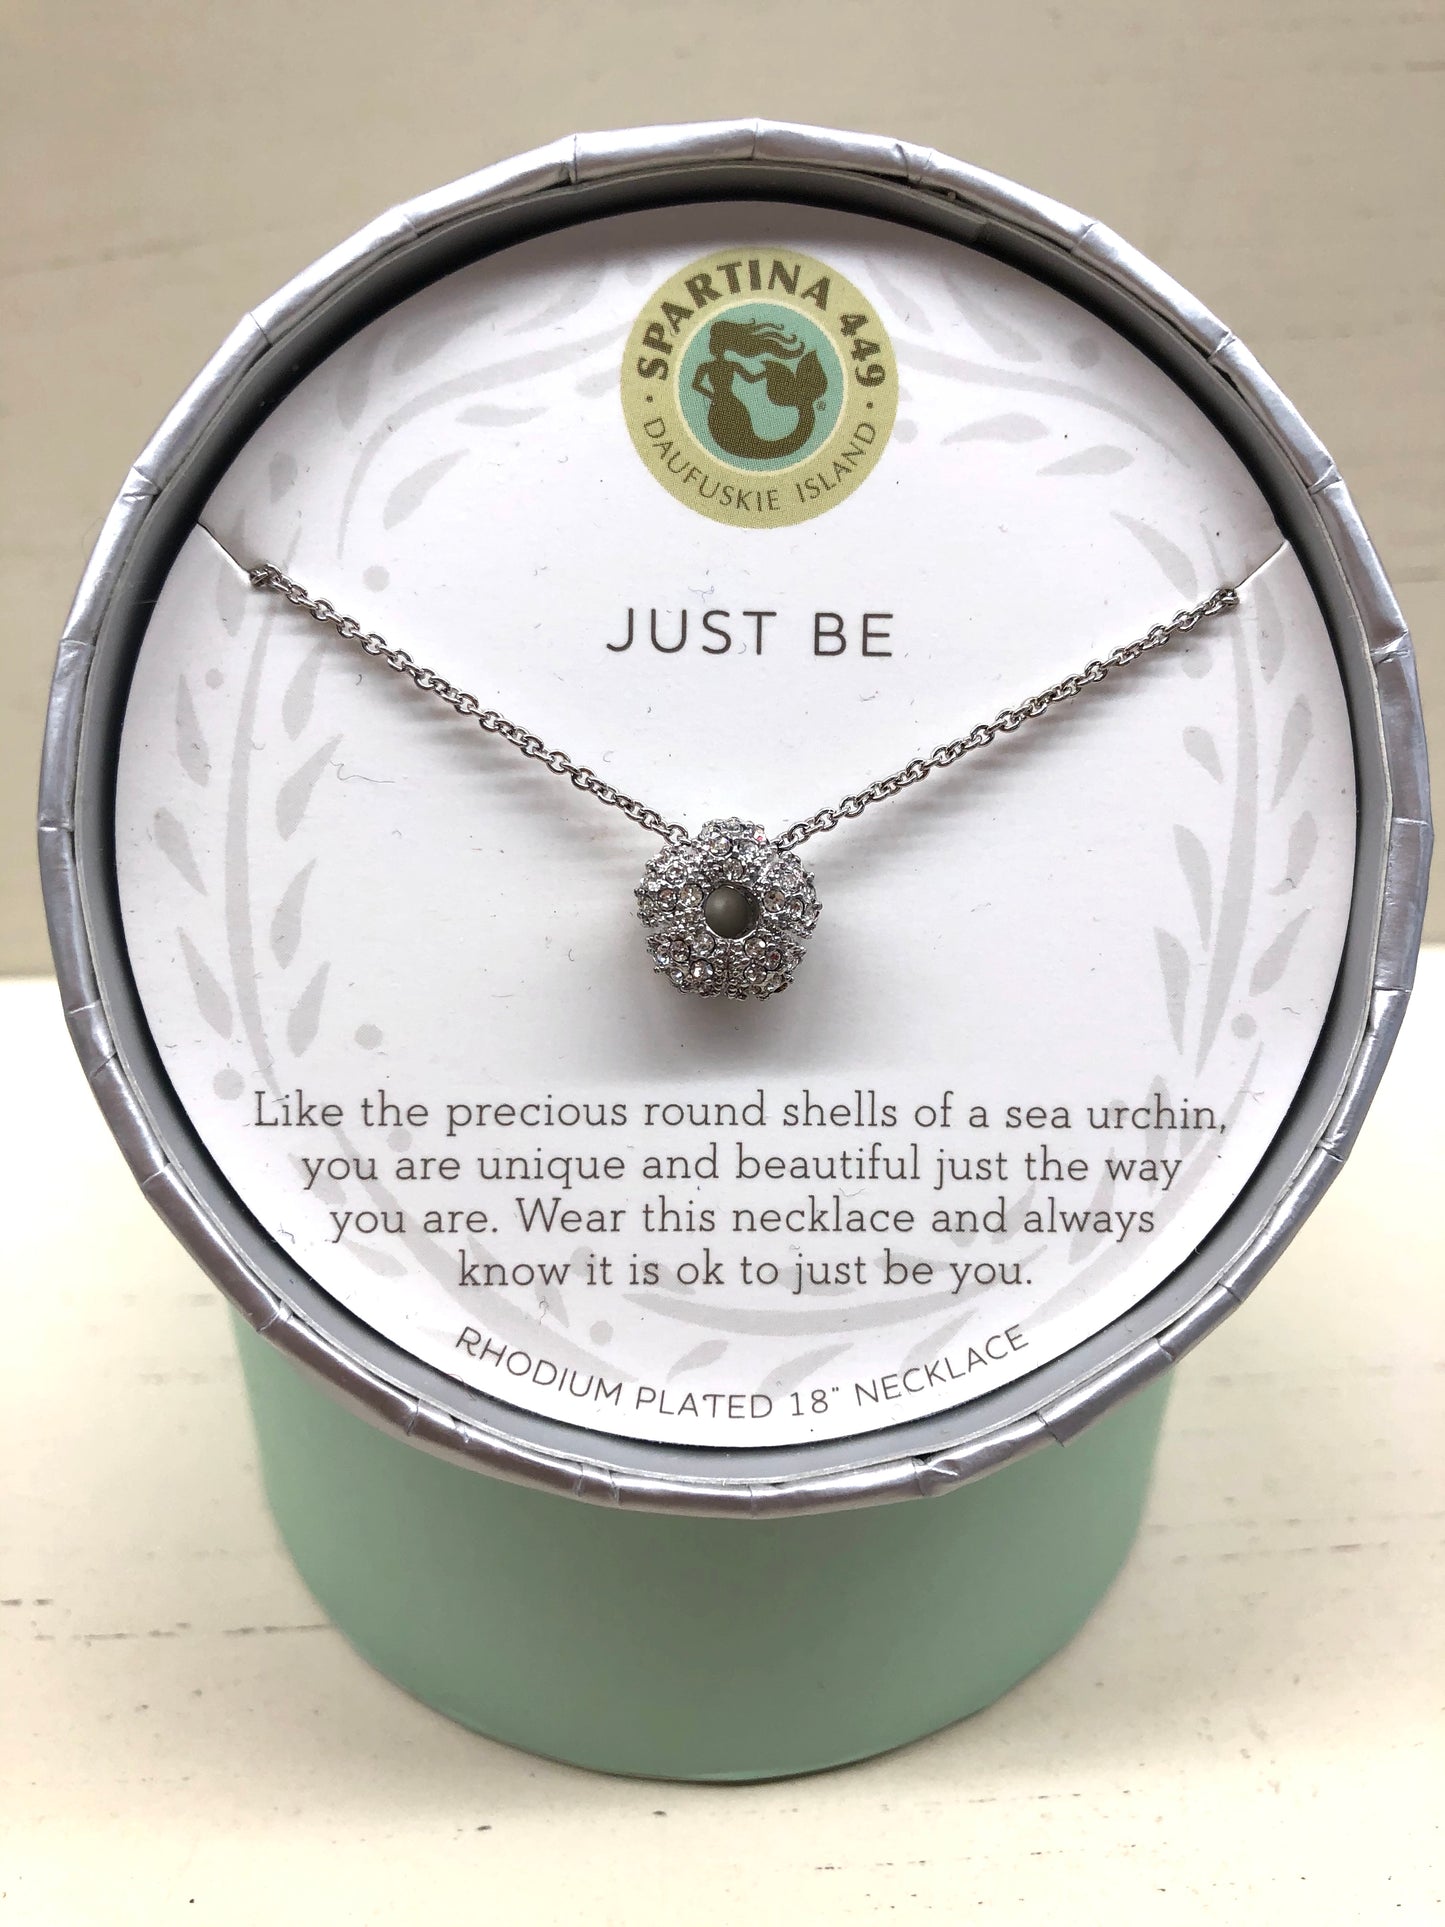 Spartina Just Be Necklace